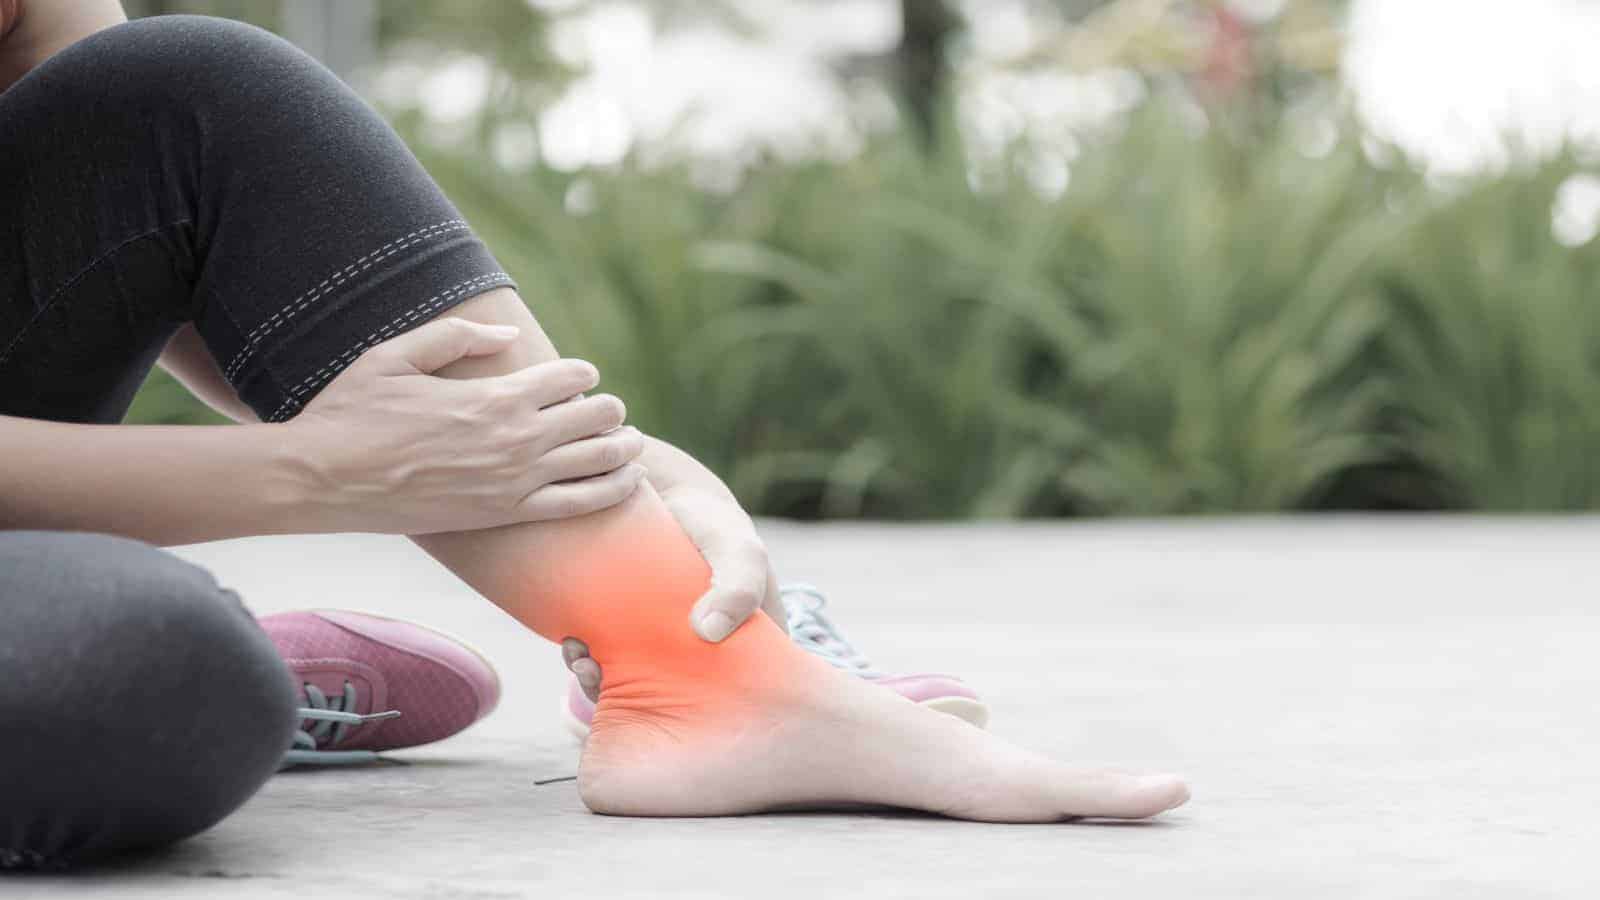 Doctors Explain the Causes of Swollen Ankles + How to Fix